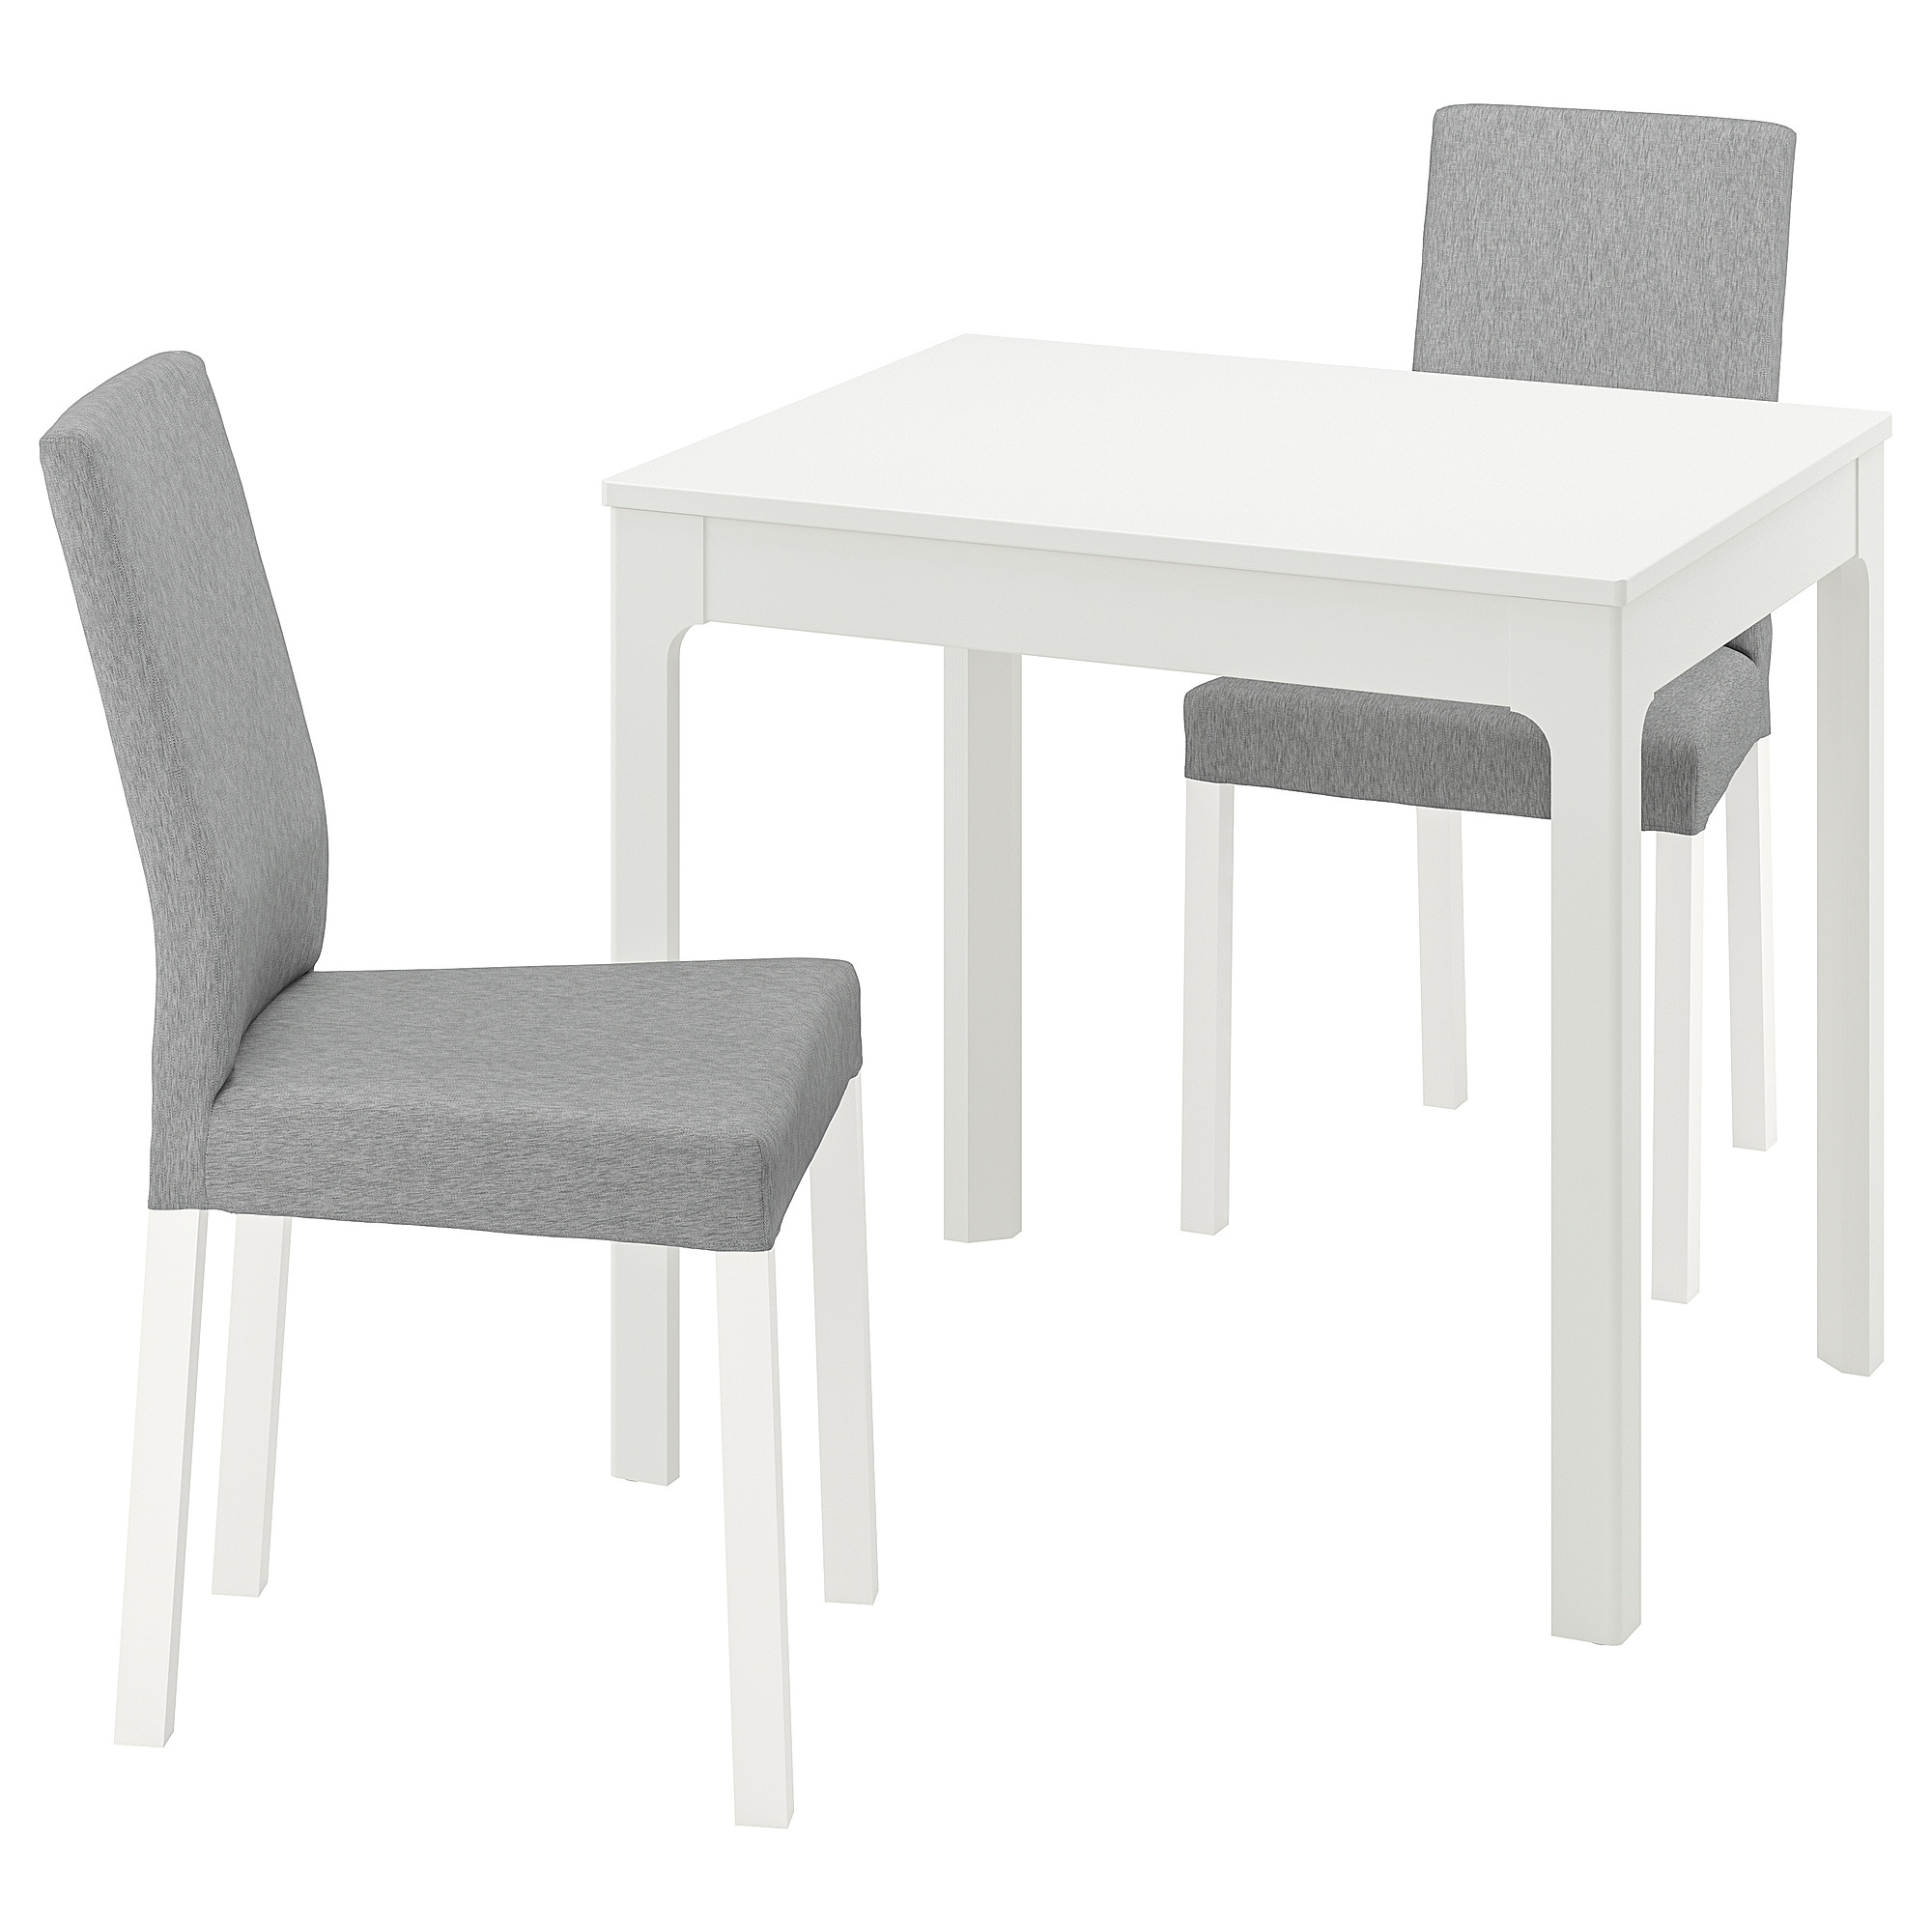 EKEDALEN/KÄTTIL table and 2 chairs